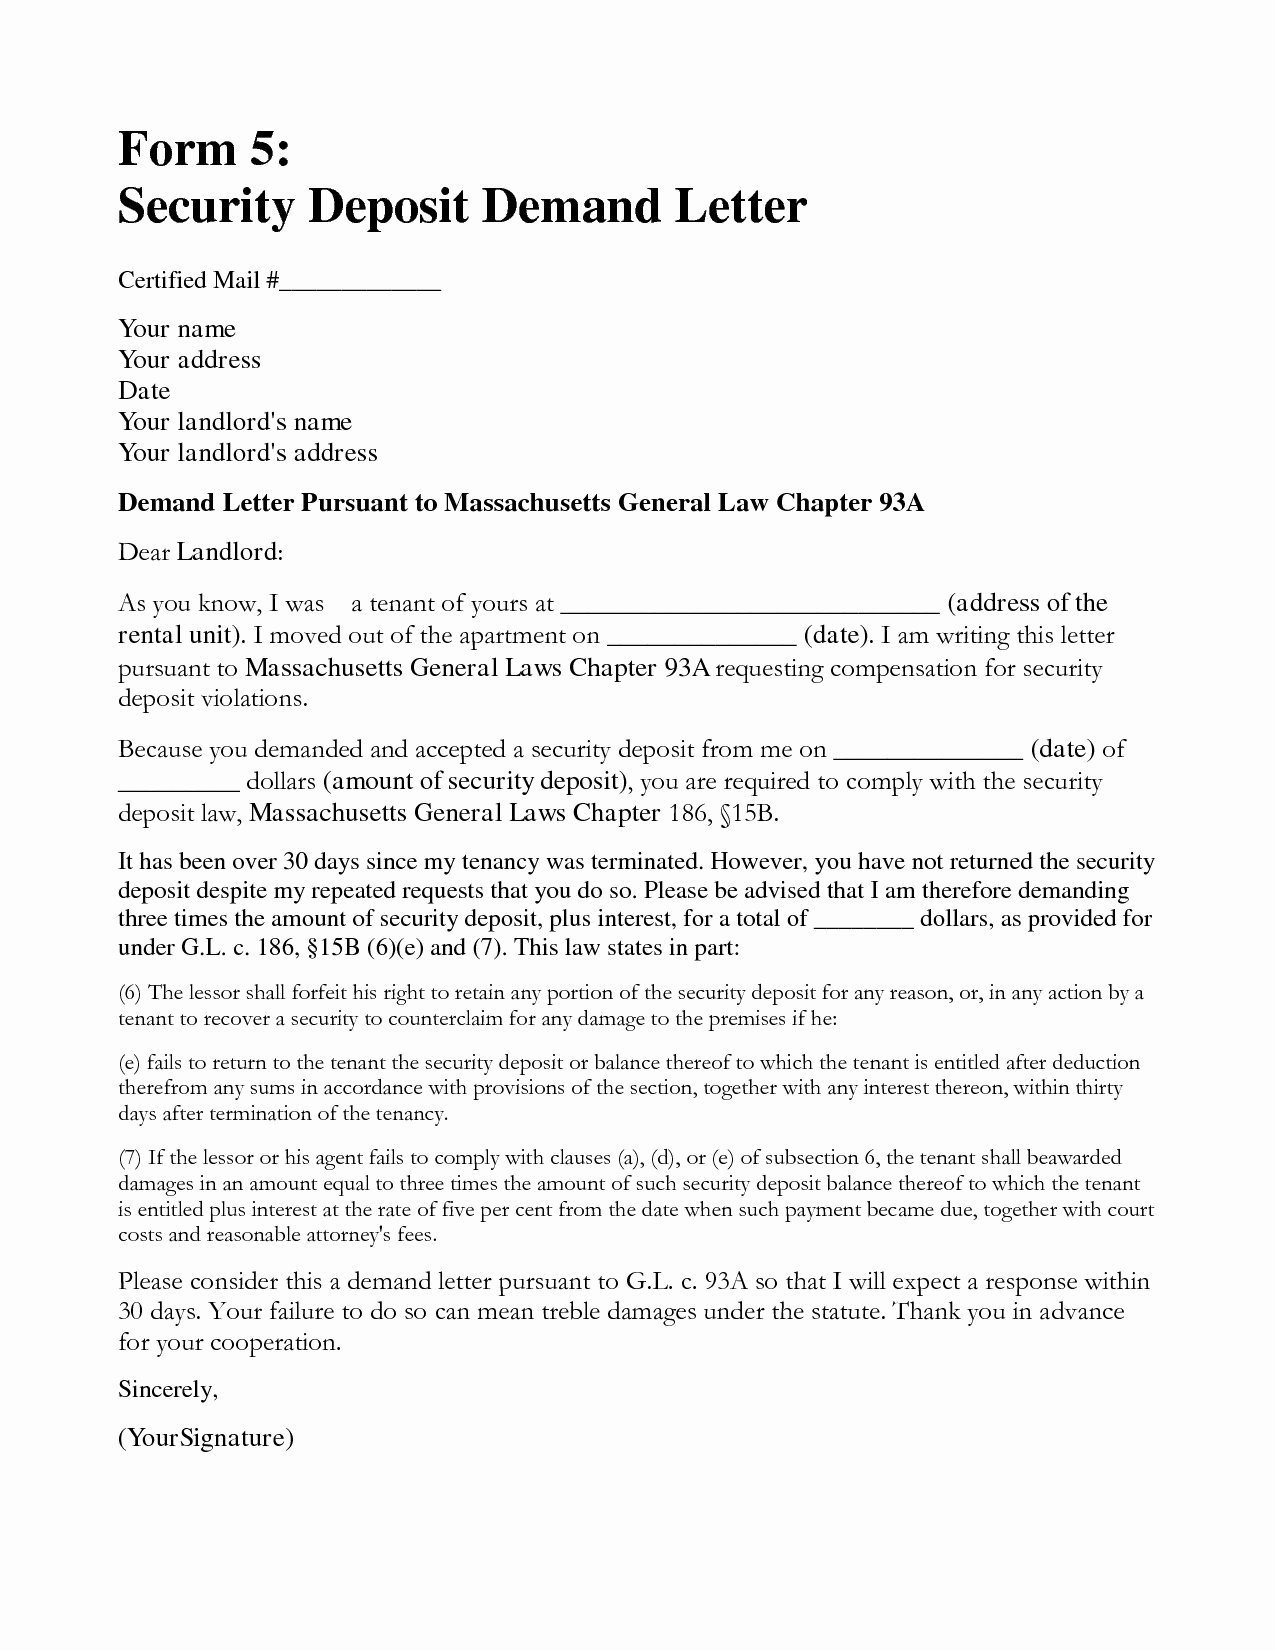 Security Deposit Letter format New Demand Letter to Landlord Template Samples